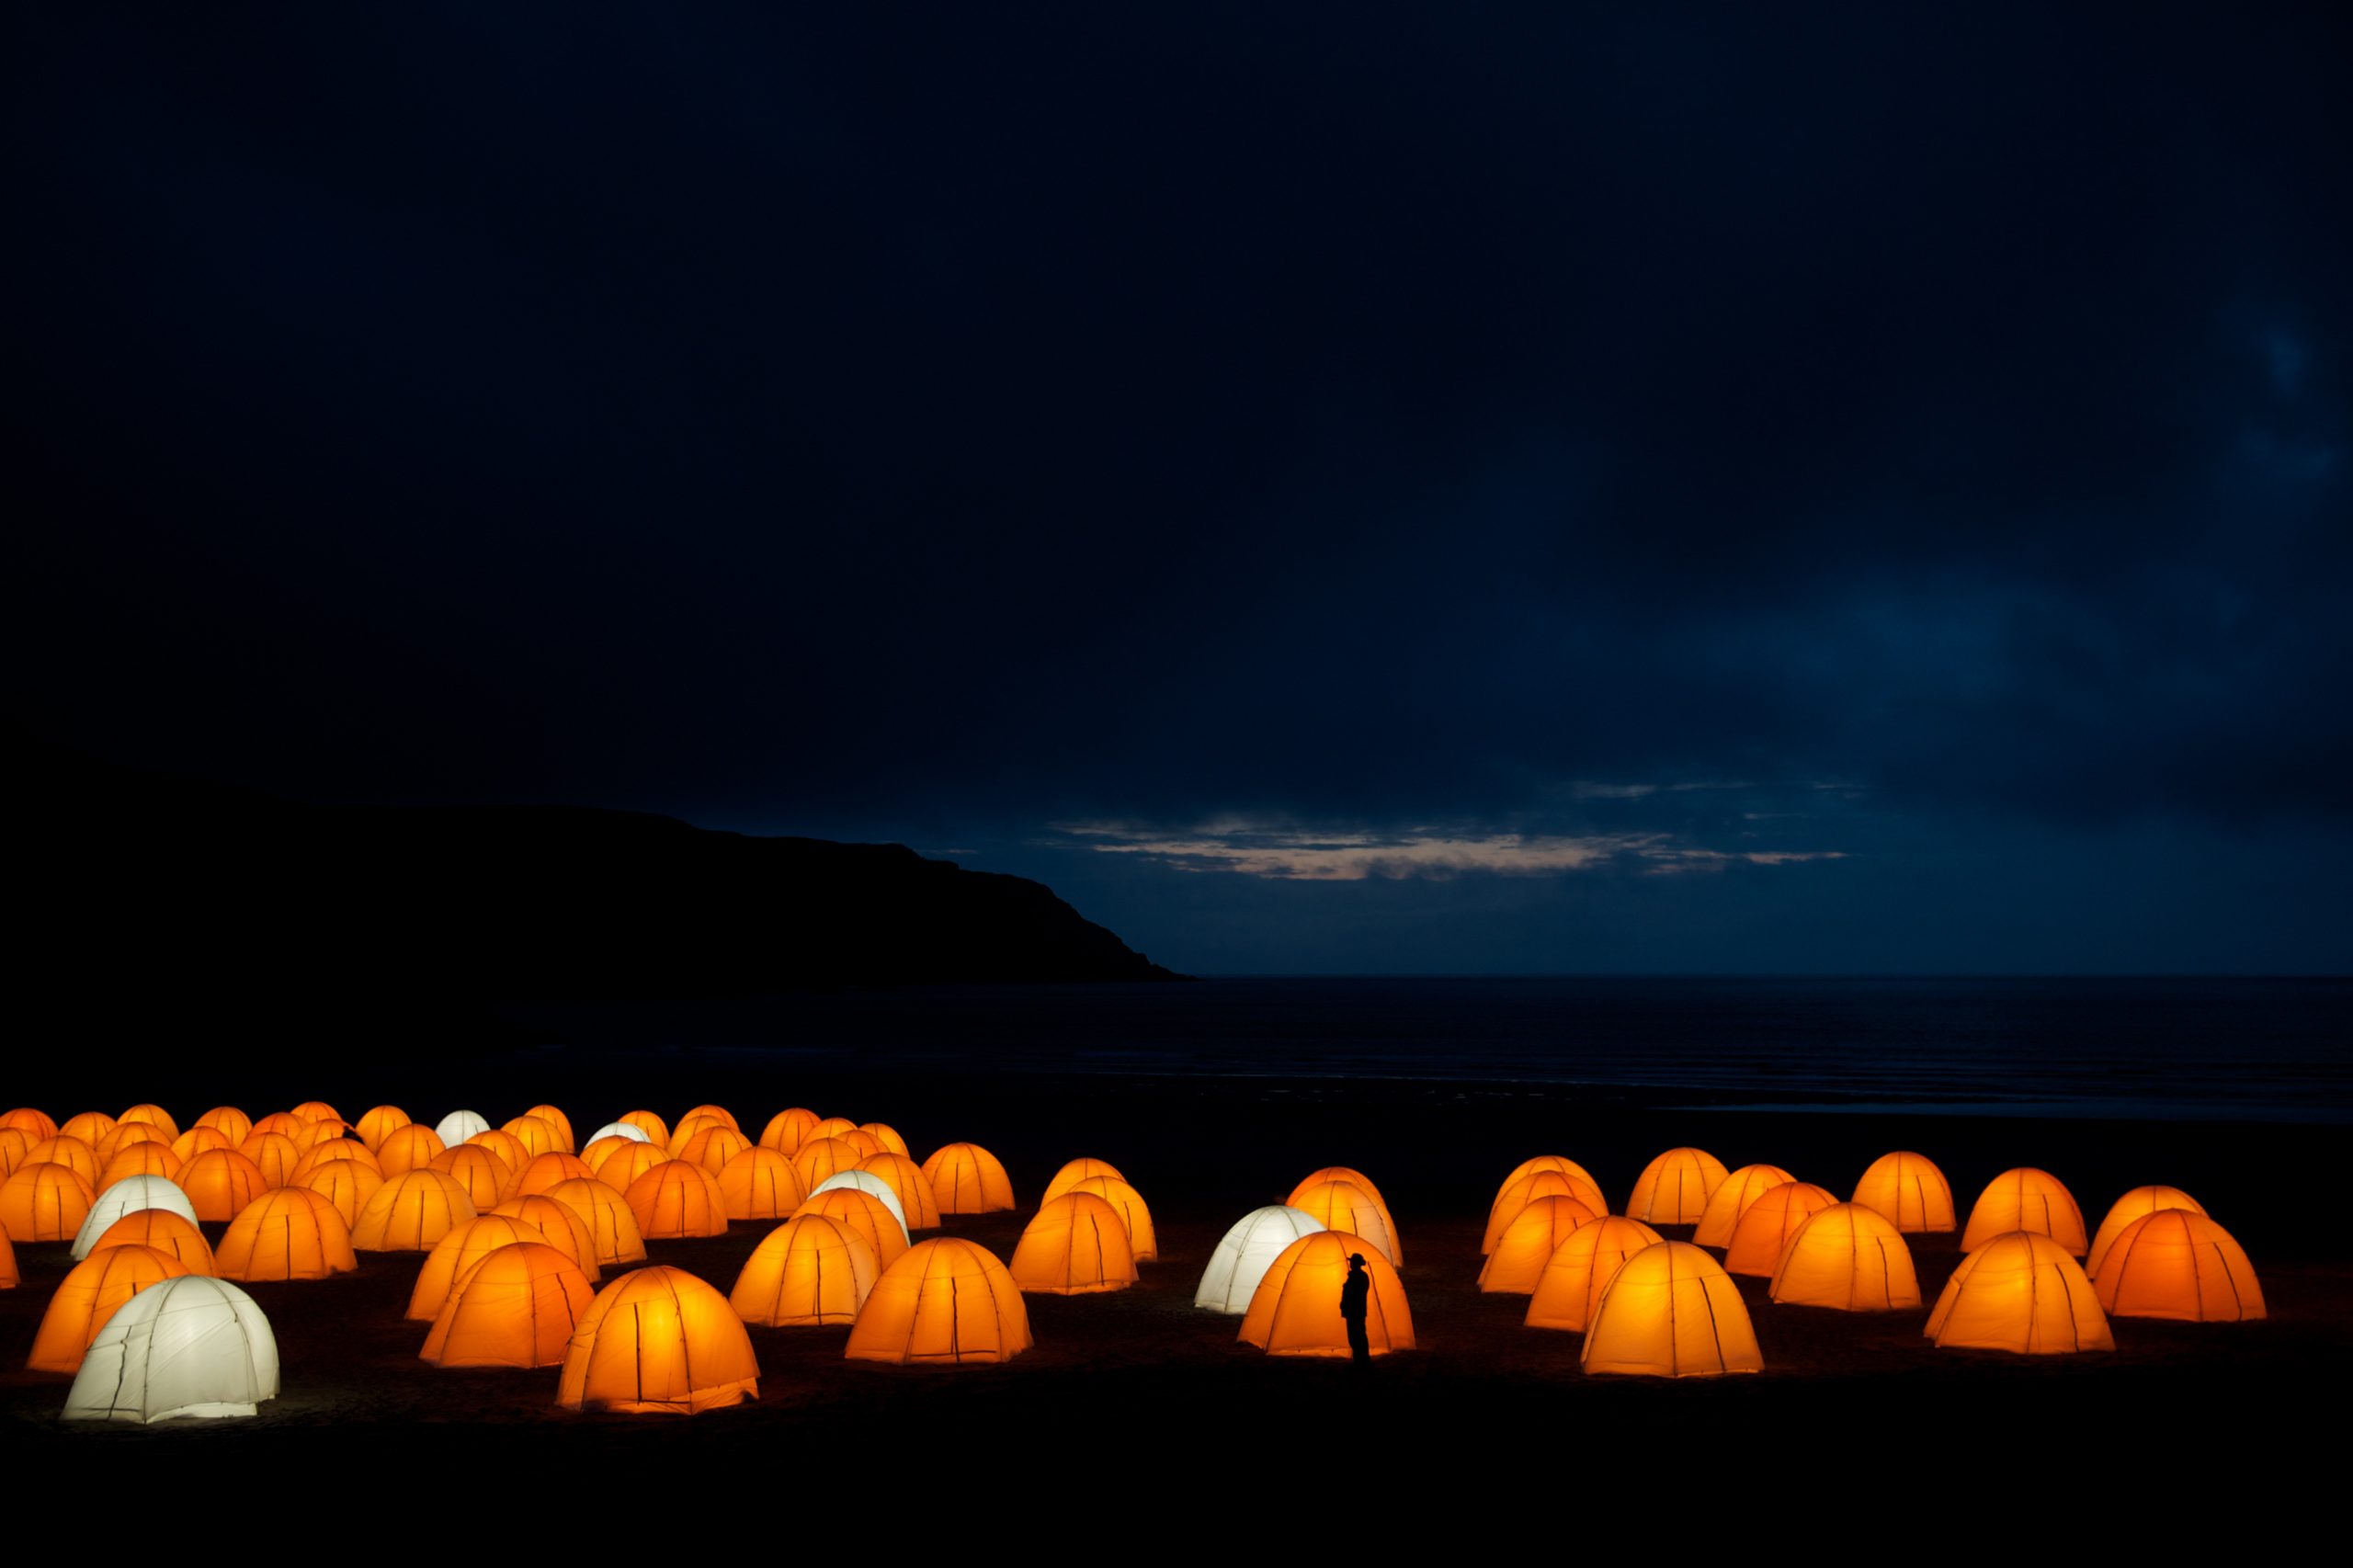 Peace Camp at Cliff Beach, Valtos, Isle of Lewis at night, silhouette of a person in front of one of the tents